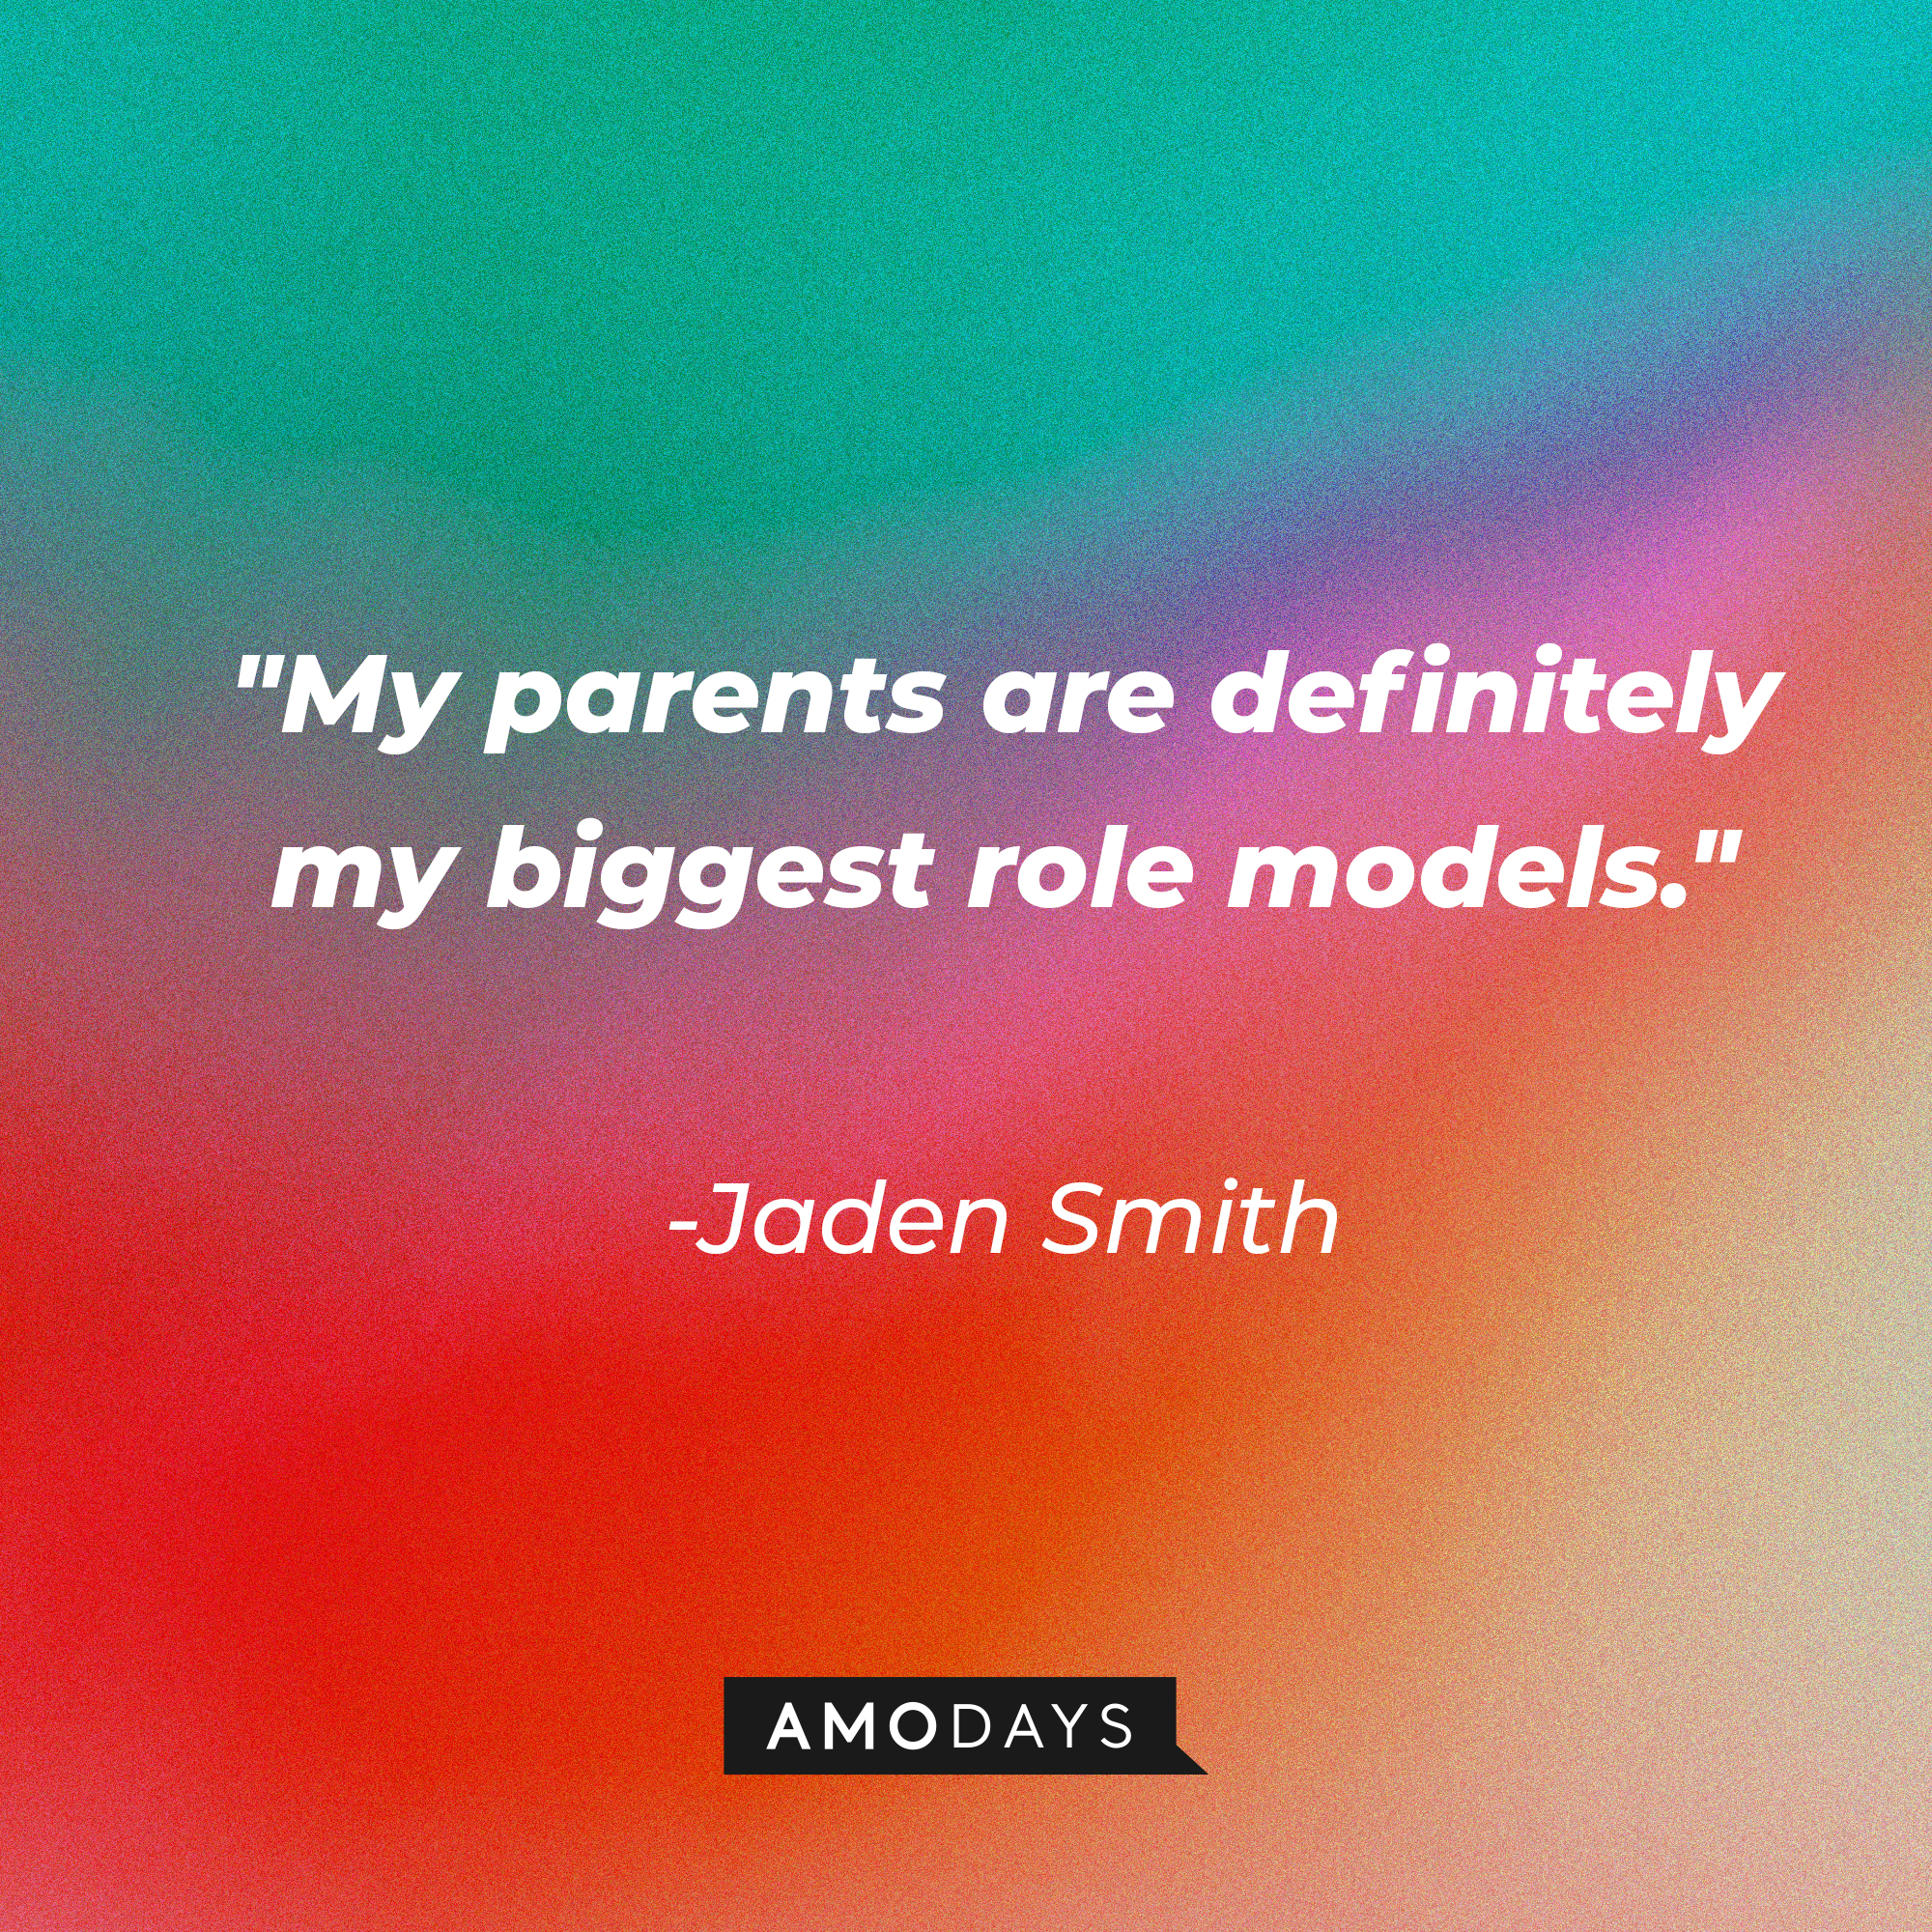 Jaden Smith's quote: "My parents are definitely my biggest role models." | Image: AmoDays